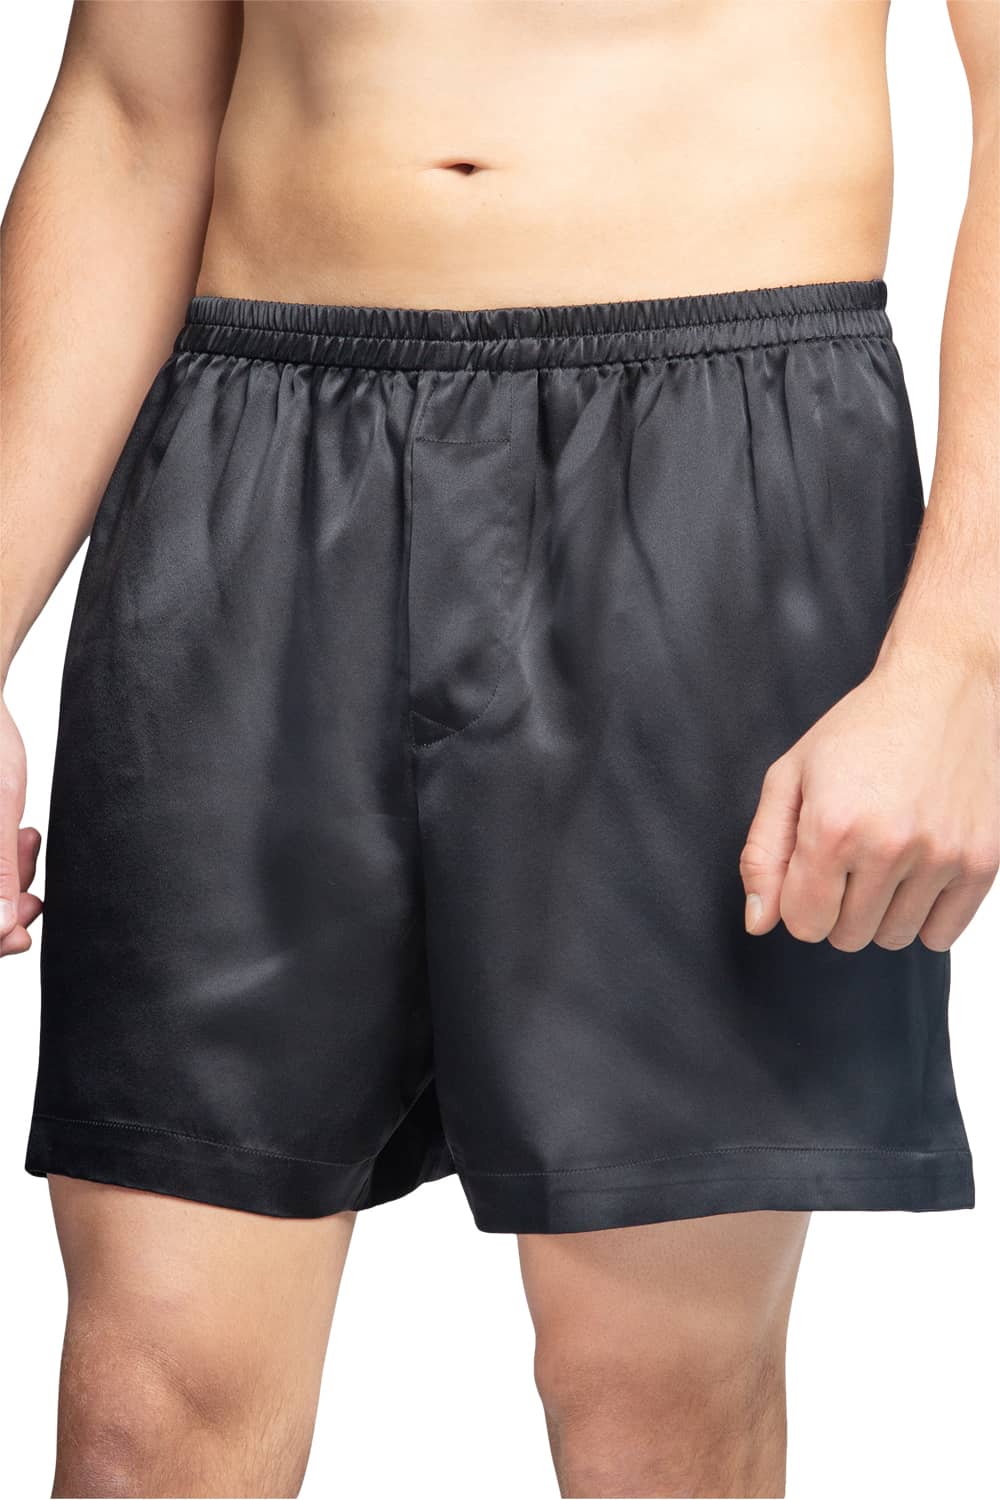 Men's 100% Pure Mulberry Silk Lounge Boxers - IMPROVED No-Roll Waistband Mens>Sleep and Lounge>Boxer Fishers Finery Moonless Night Small 